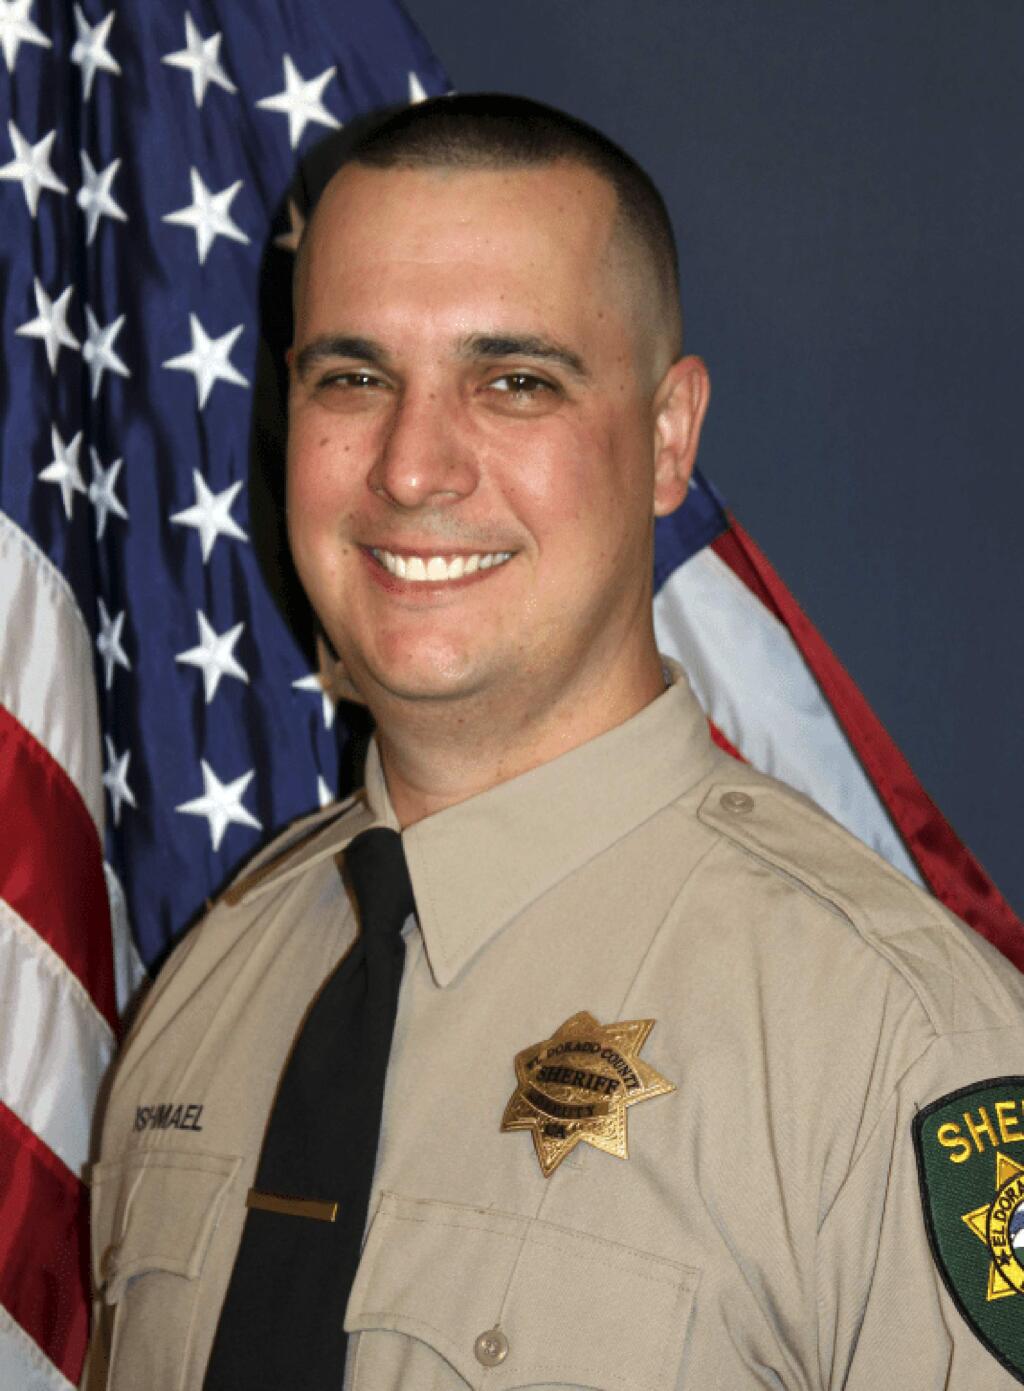 This undated photo provided by the El Dorado County Sheriff's Office shows Deputy Brian Ishmael. The Sheriff's office says Ishmael was fatally shot early Wednesday, Oct. 23, 2019 in the Sierra Nevada Foothills community of Somerset, Calif., and a ride-along passenger with him was injured. An office statement says two men were taken into custody but the scene about 45 miles east of Sacramento remains active. (El Dorado County Sheriff's Office via AP)